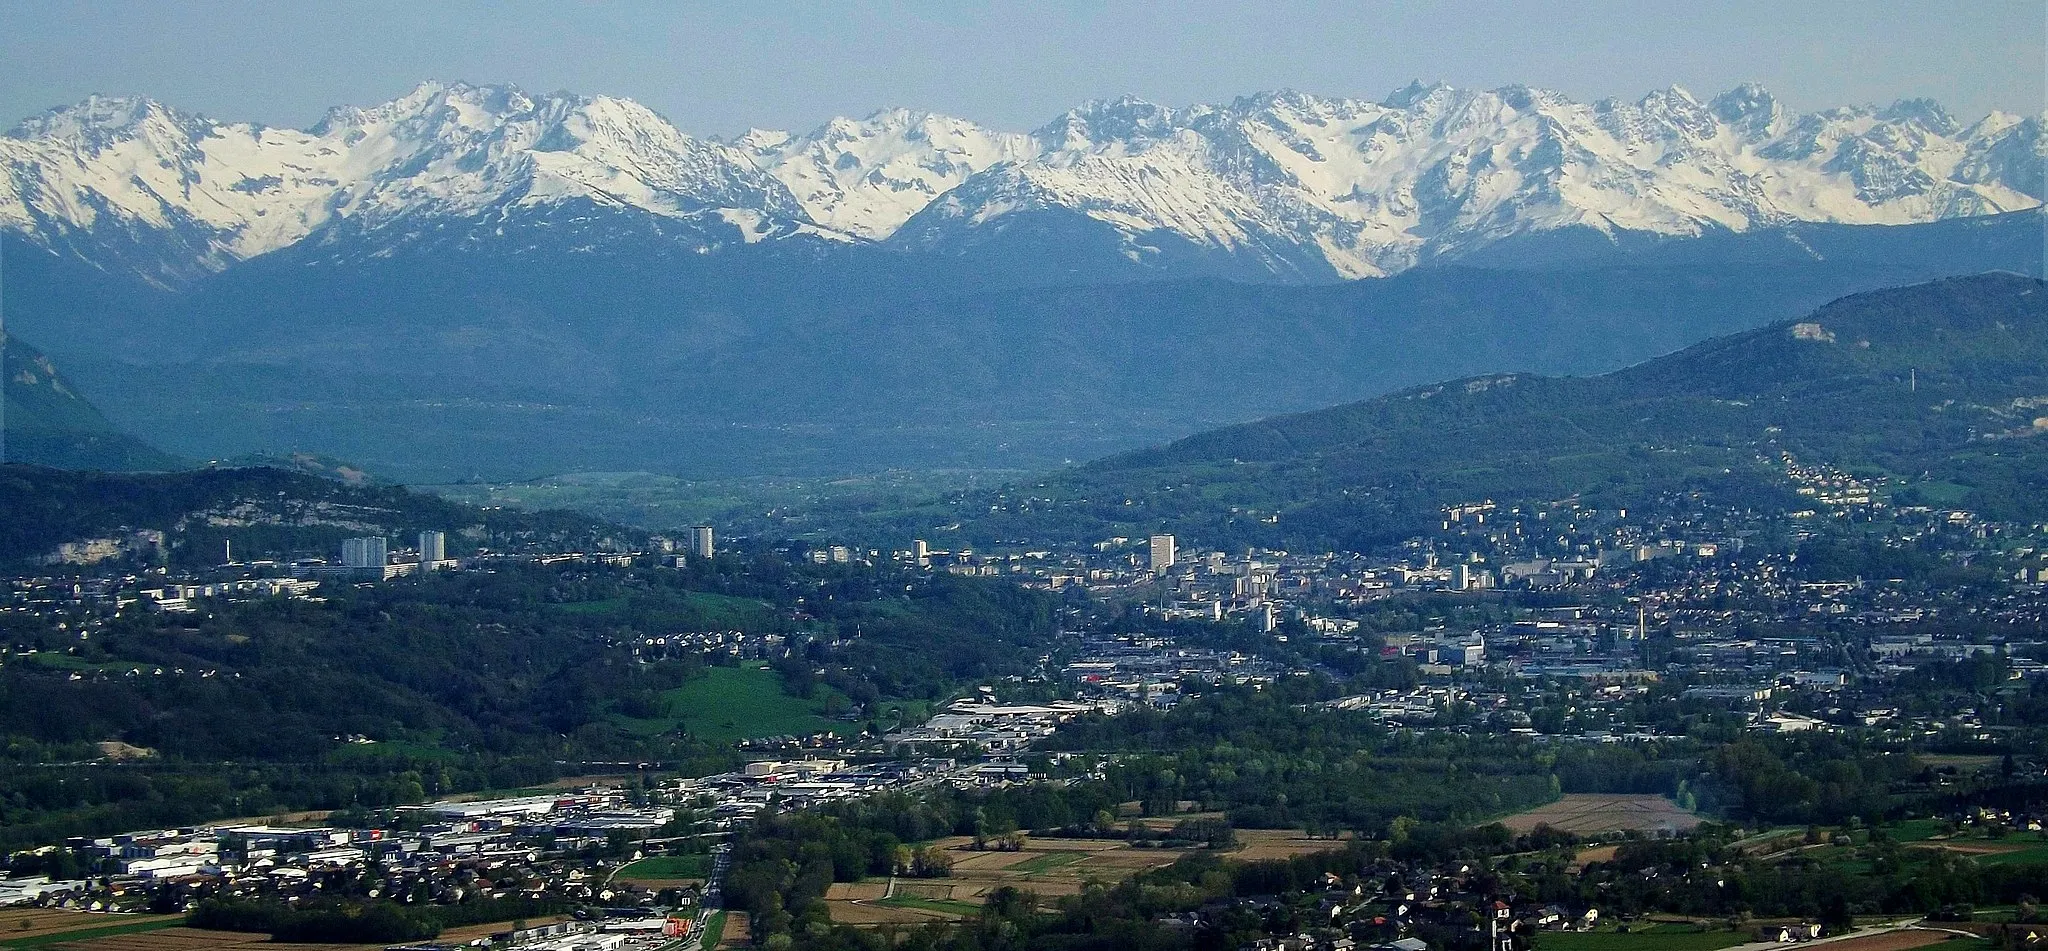 Photo showing: Panoramic sight (from the Mont du Chat mount) of nearly entire commune of Chambéry and the chaîne de Belledonne mountains, in Savoie, France.